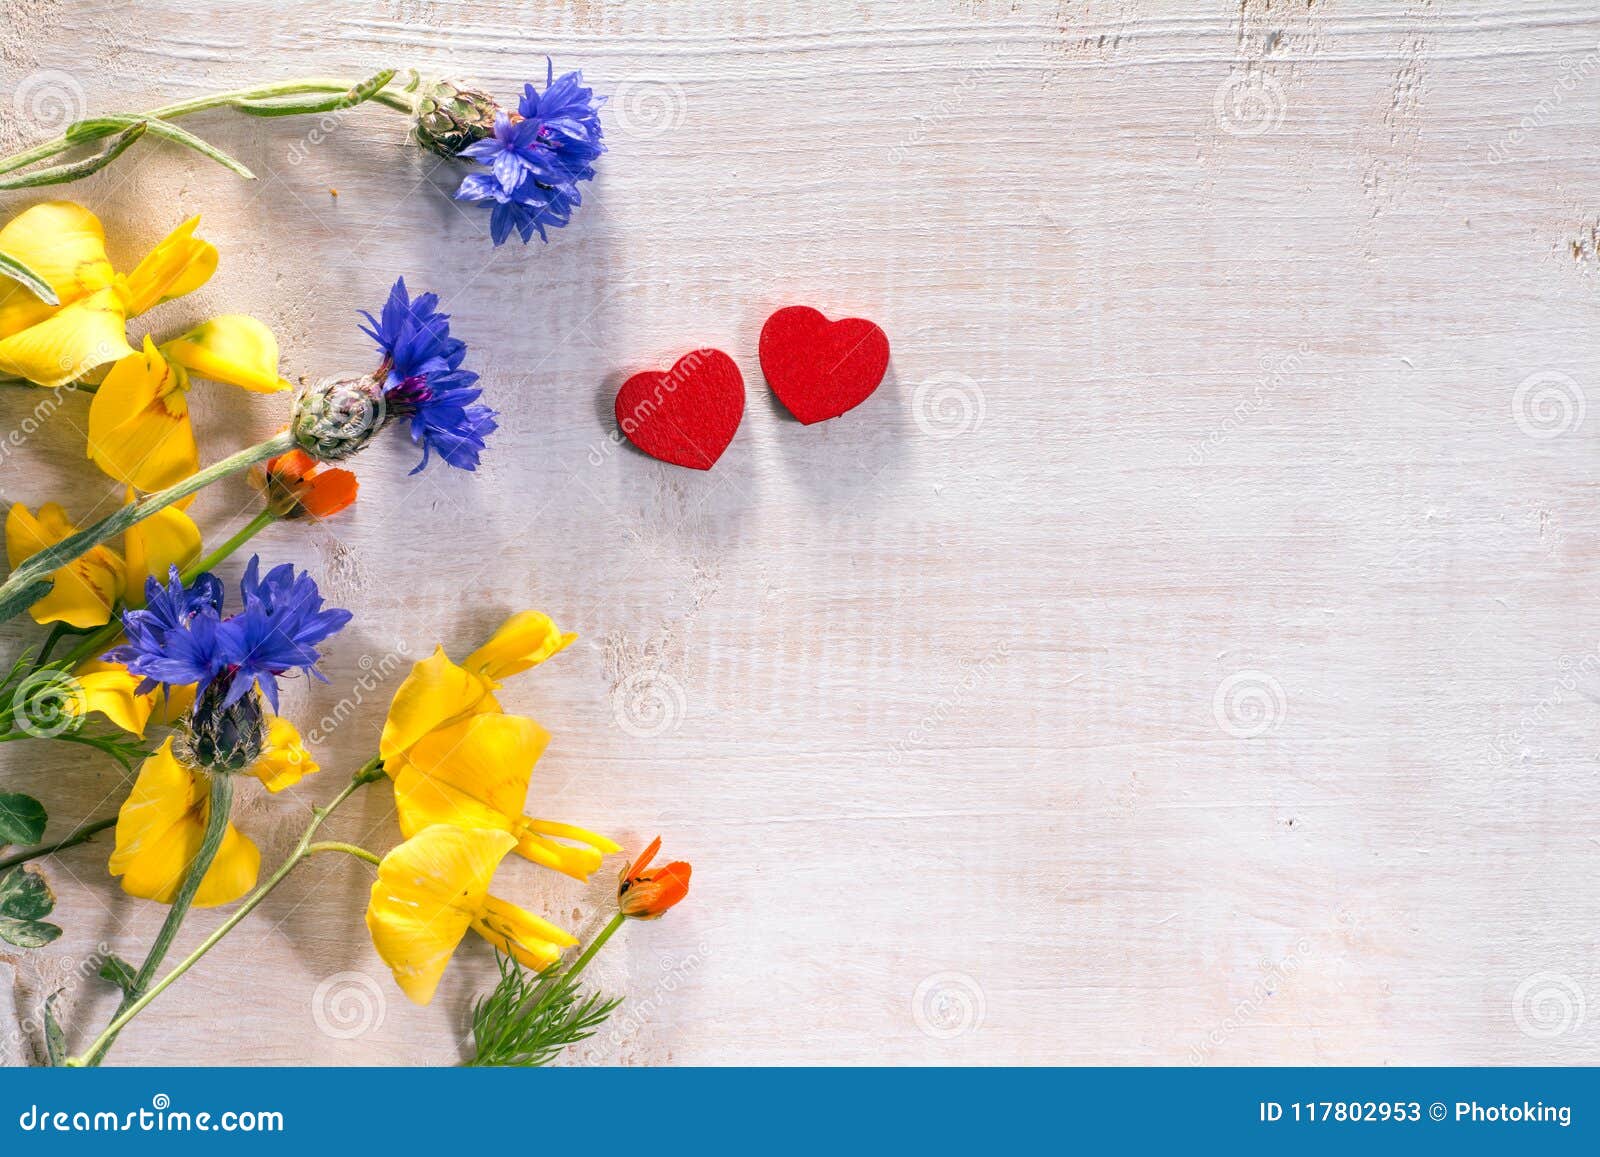 Wild Flowers And Hearts On Wood Stock Image Image Of Leaf Copy 117802953